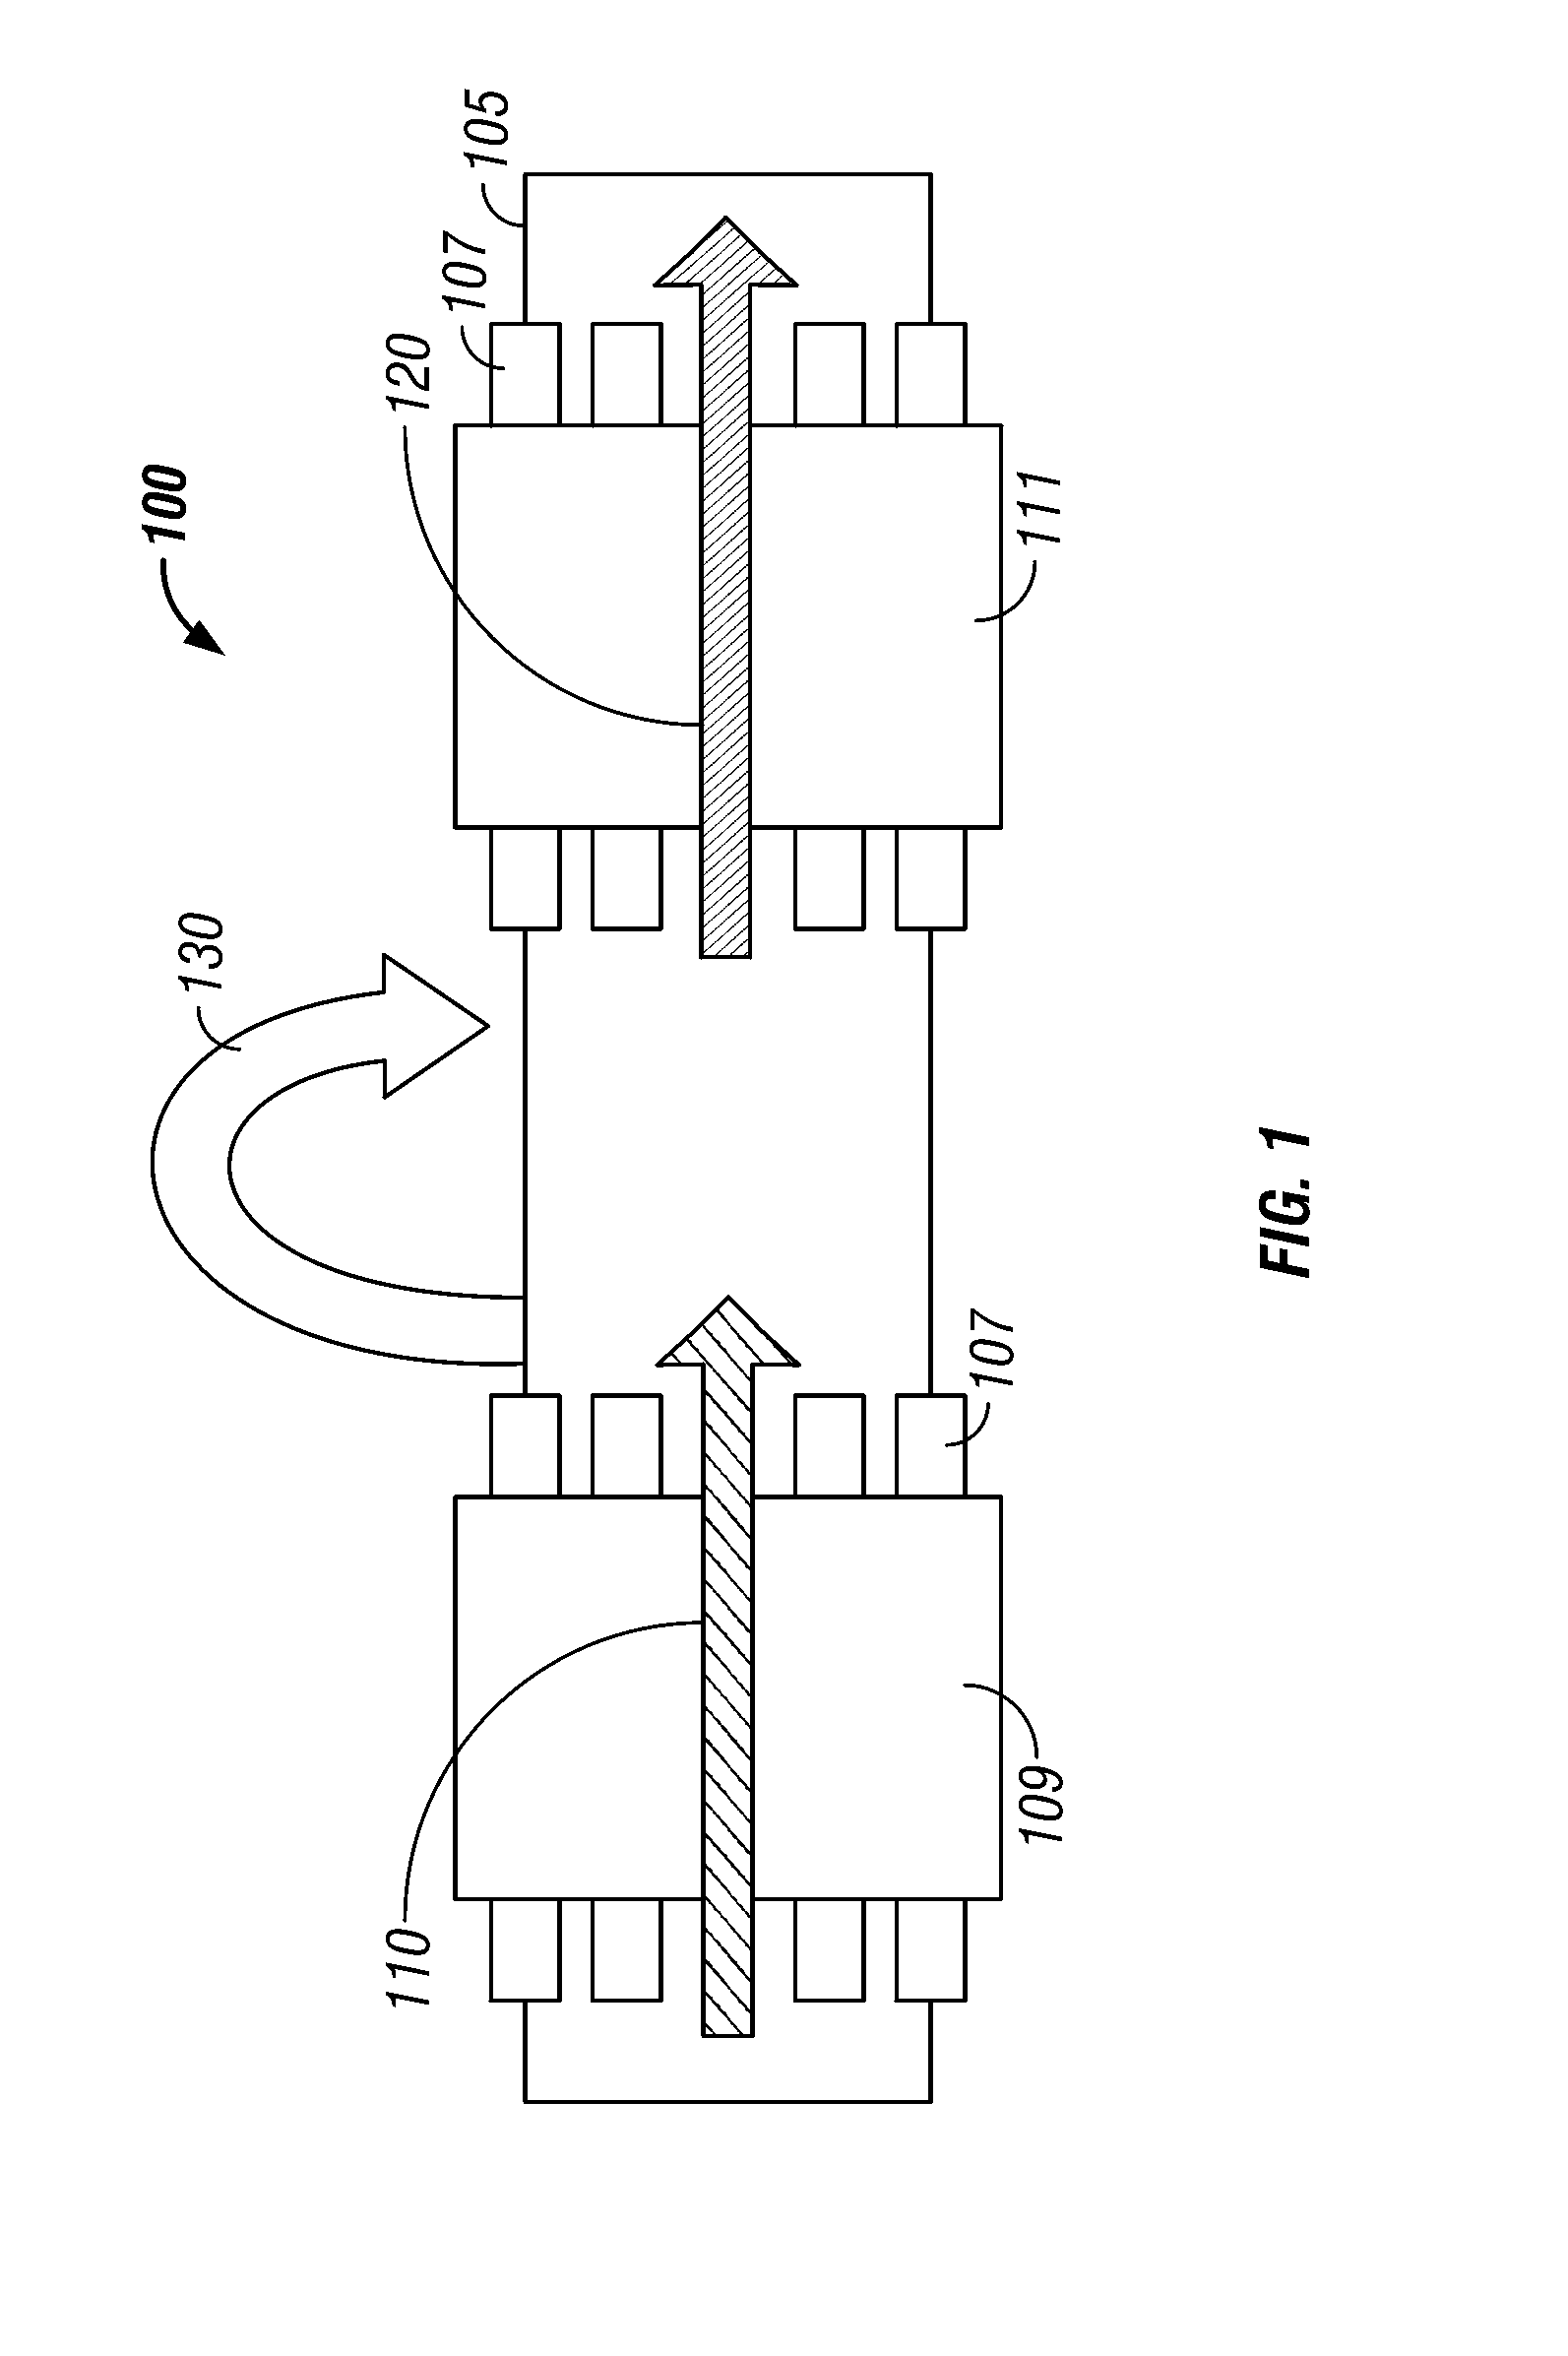 Method and Apparatus for a Multi-component Induction Instrument Measuring System for Geosteering and Formation Resistivity Data Interpretation in Horizontal, Vertical and Deviated Wells